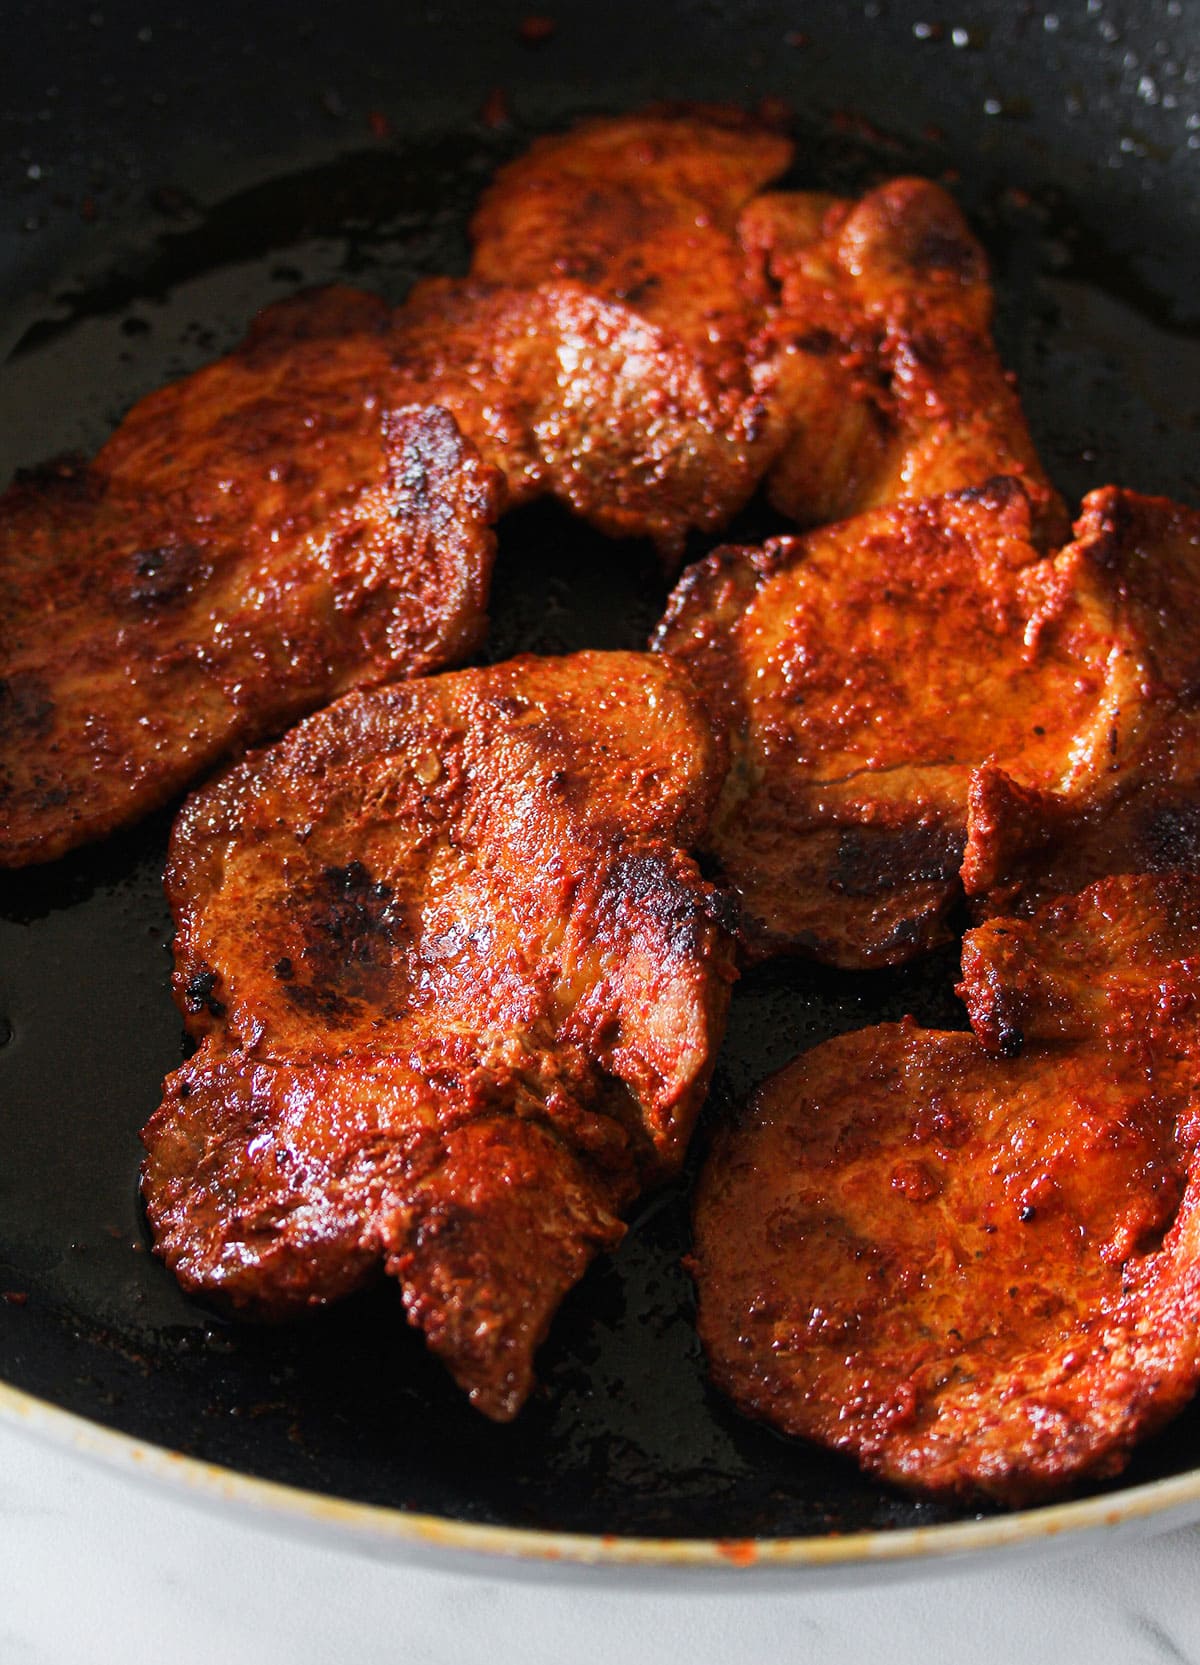 Cooked meat for tacos de adobada in a pan.